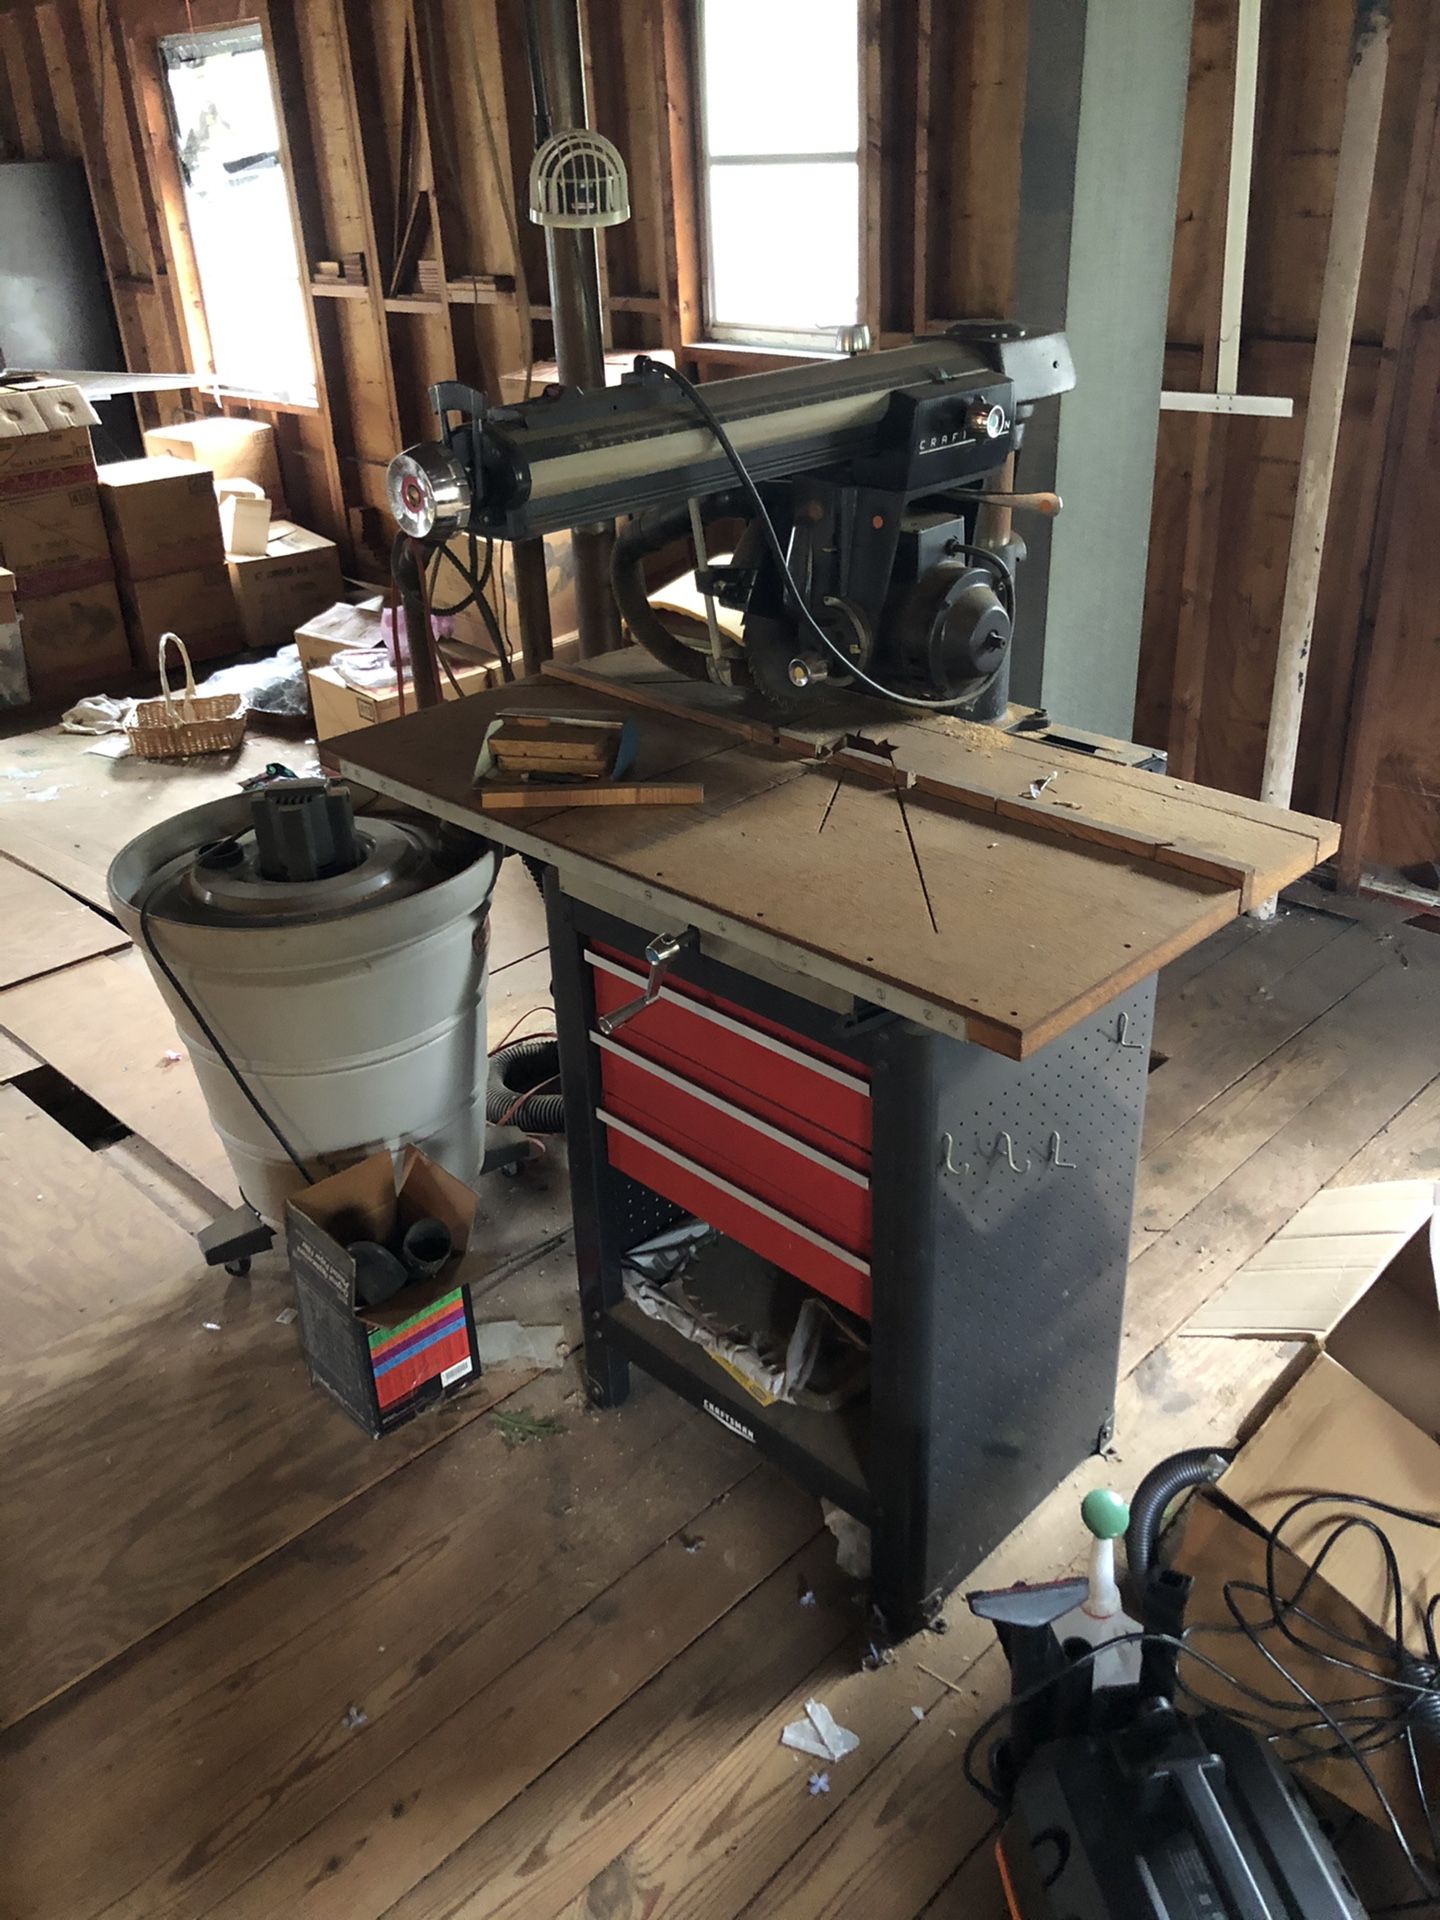 Craftsman stationery table saw